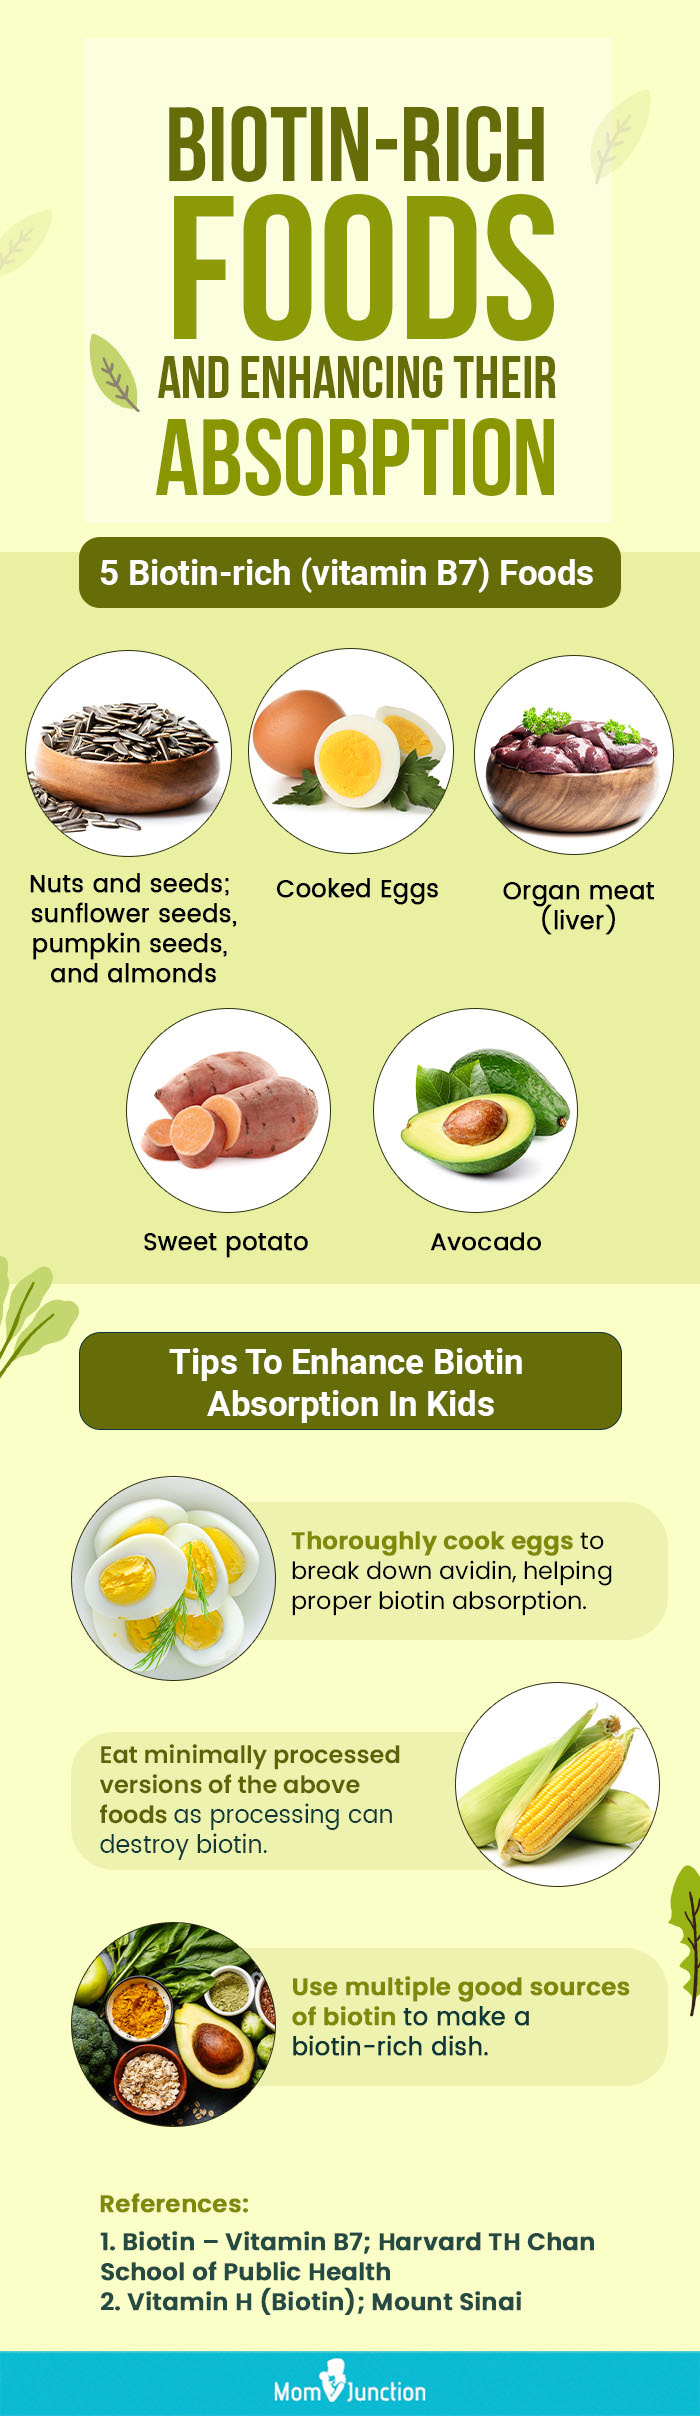 biotin rich foods and enhancing their absorption (infographic)